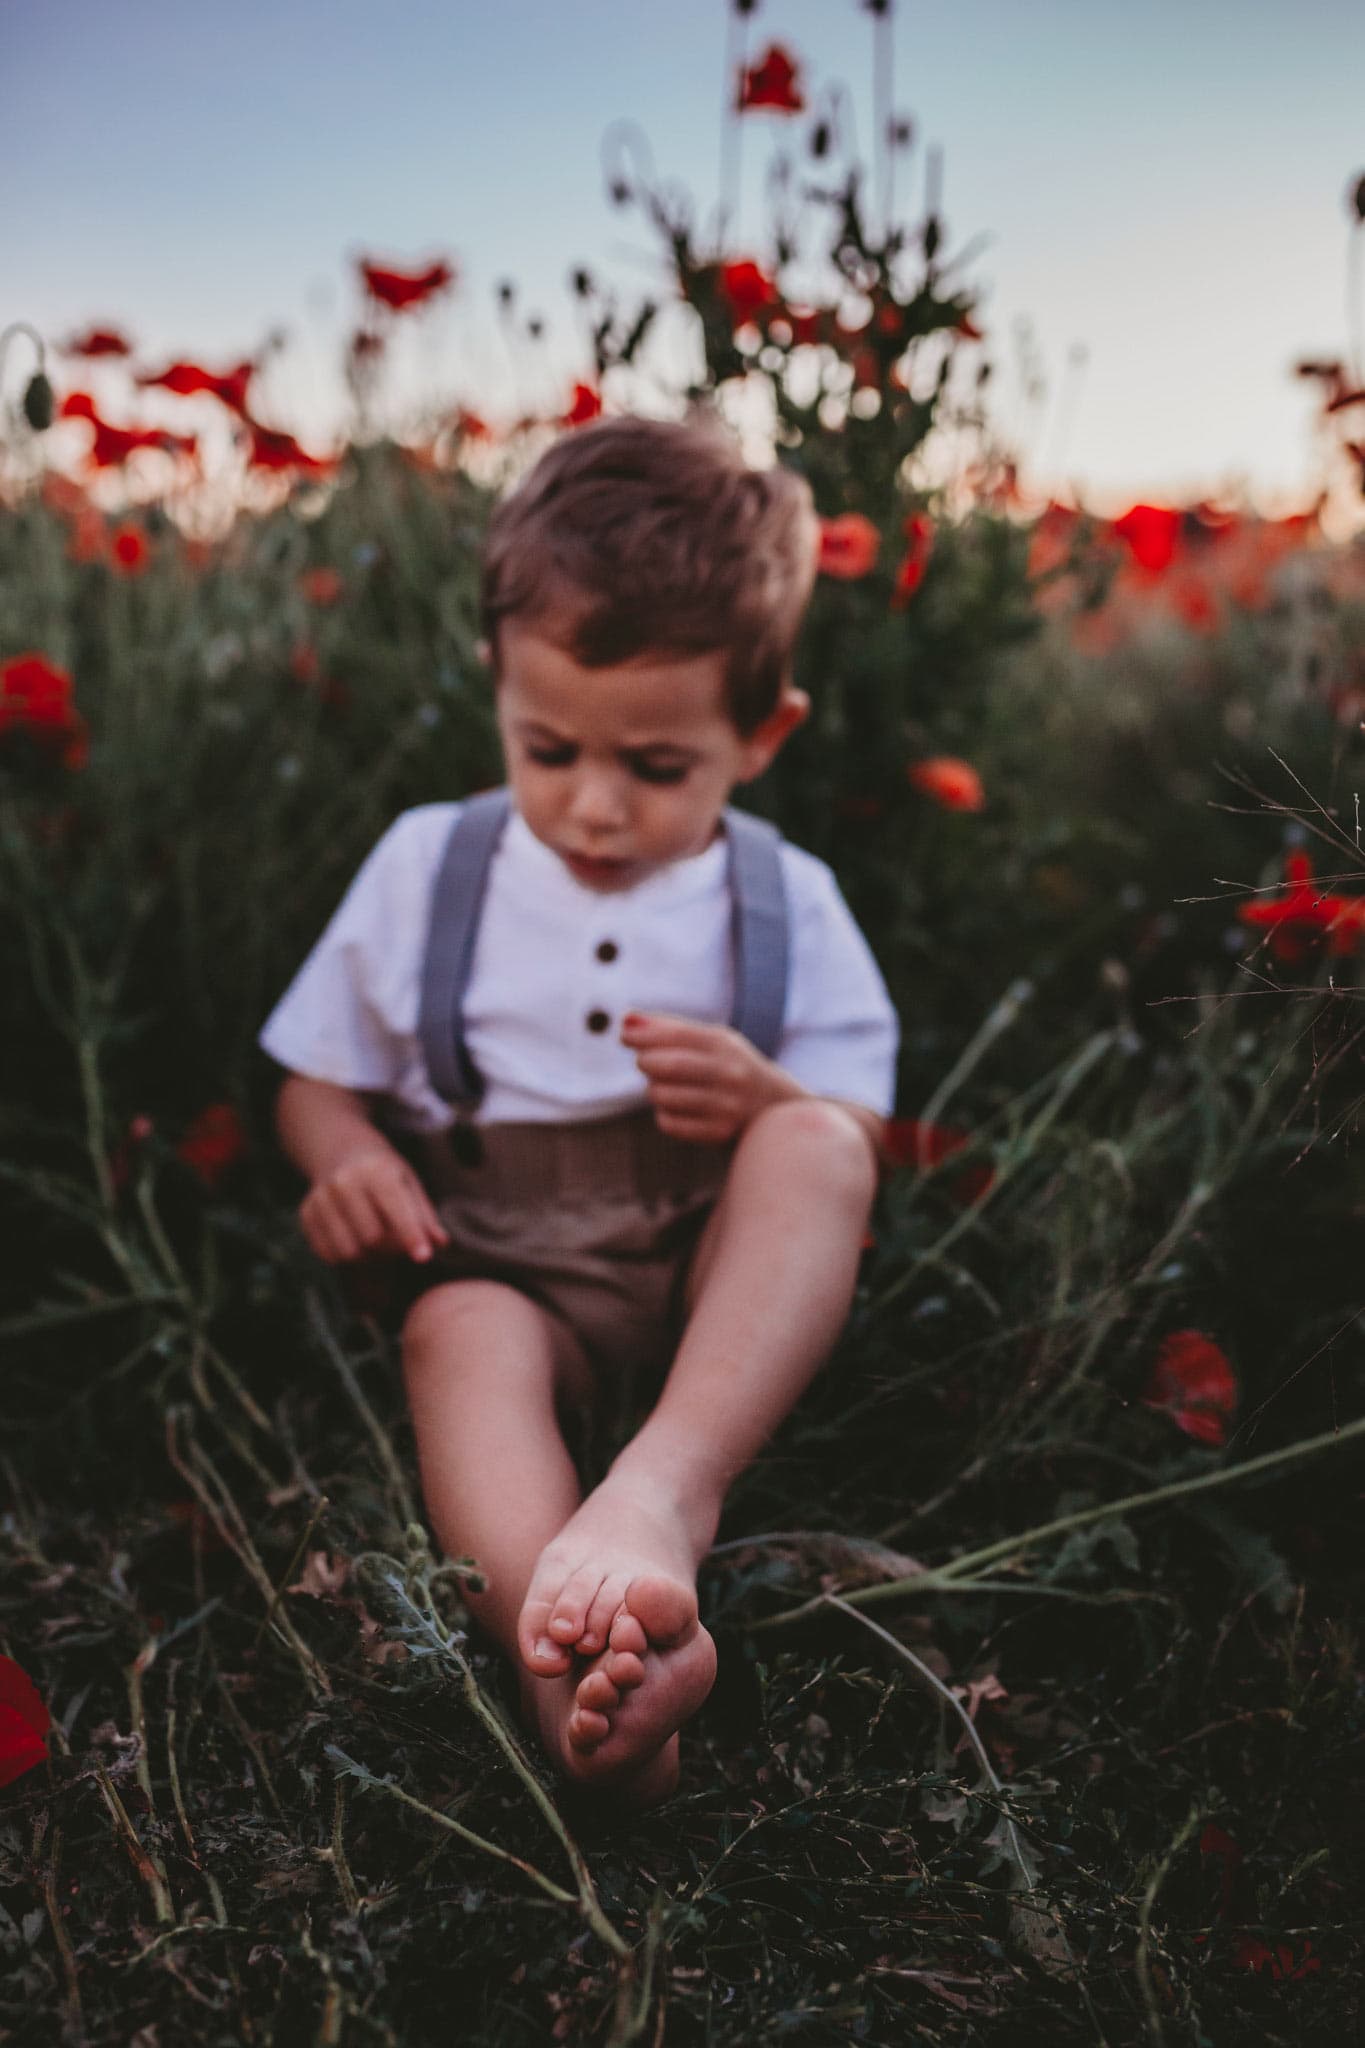 Toddler boy sitting in flowers with the focus on his feet